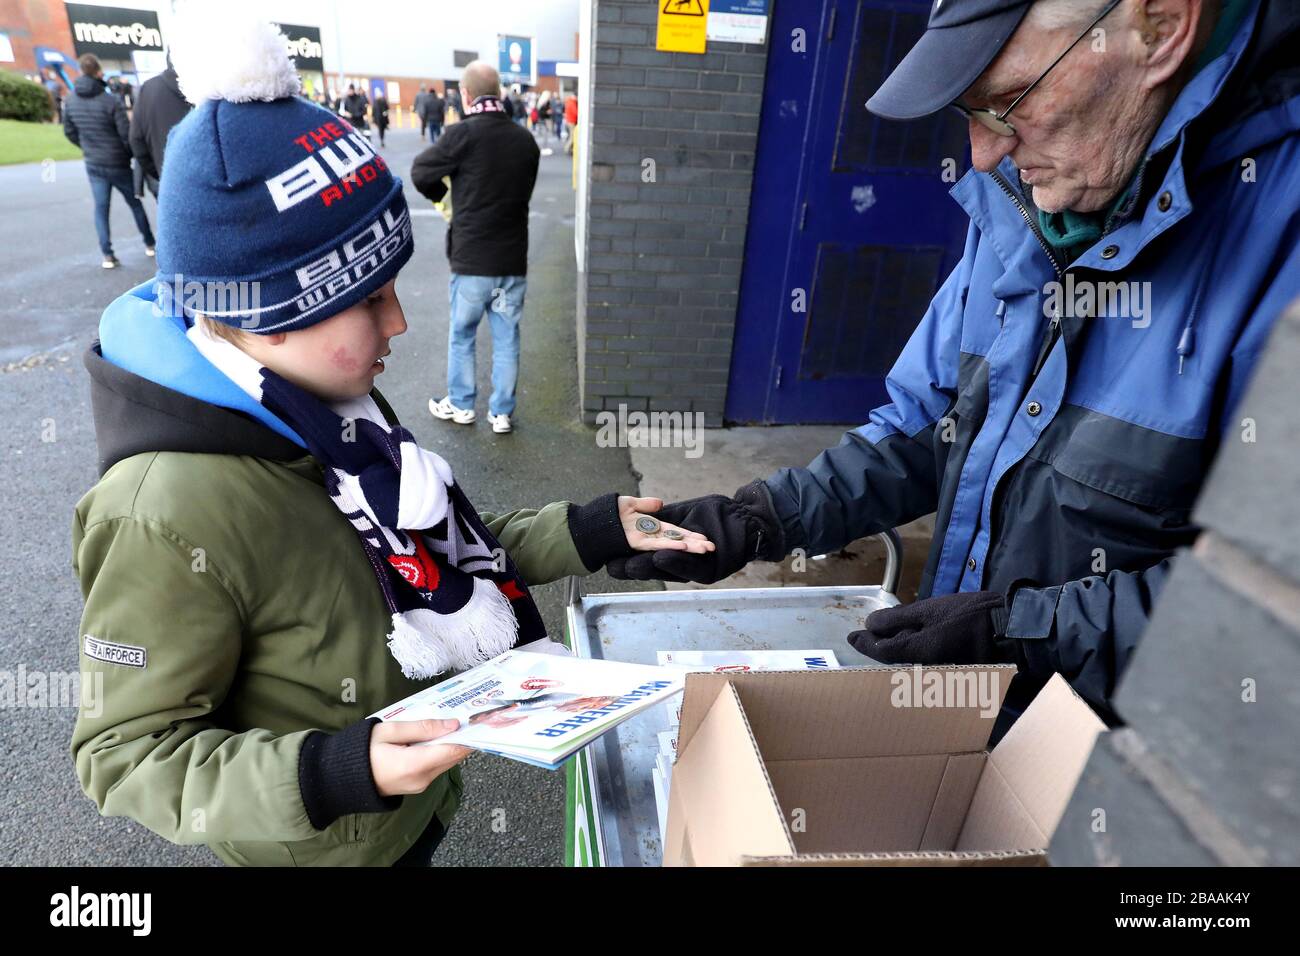 A young Bolton Wanderers fan buys a programme prior to the match Stock Photo